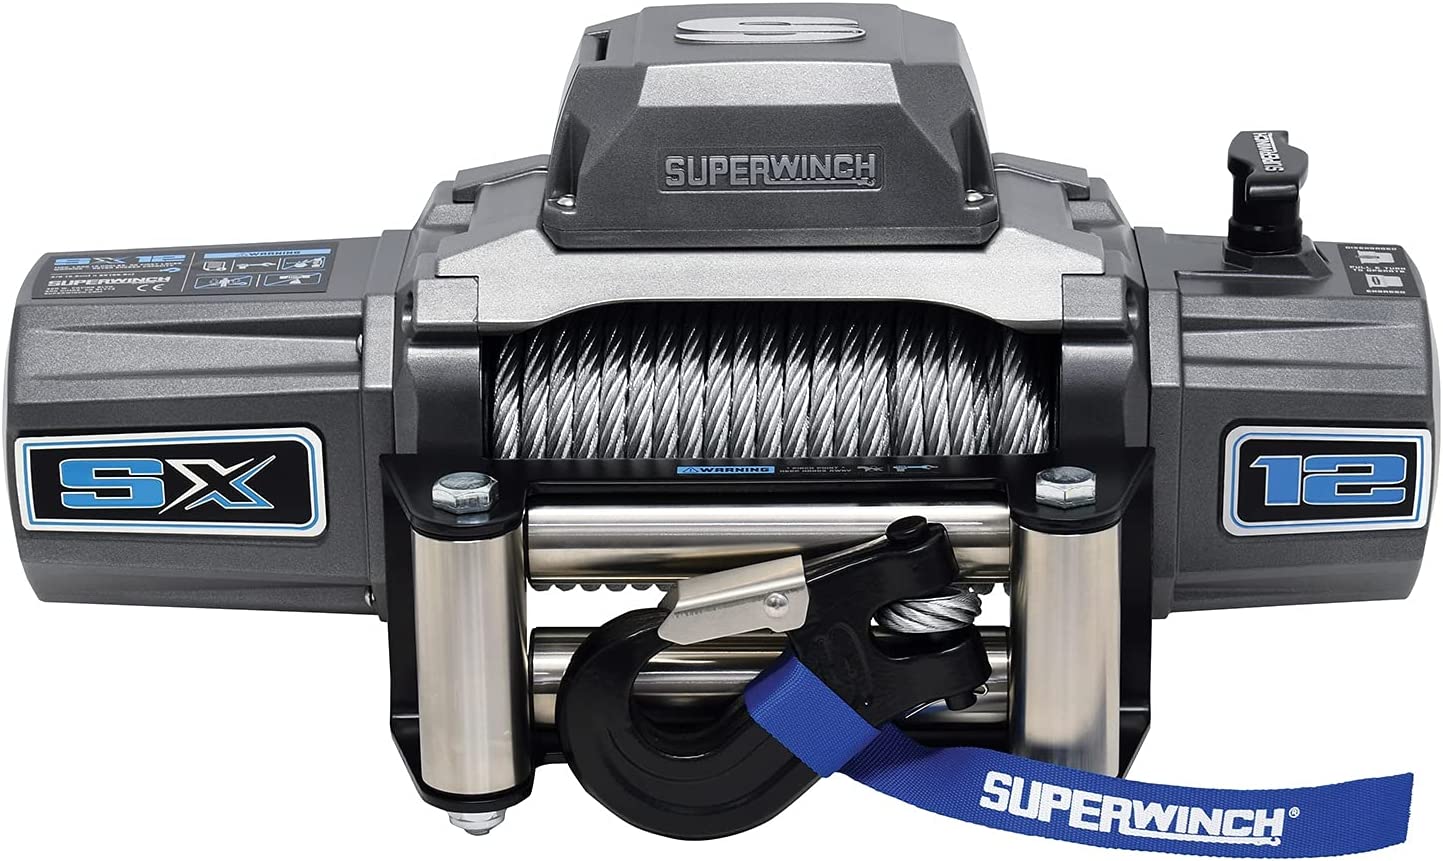 Superwinch SX12 12V Wire Rope Winch 12000 lb Capacity - 1712200